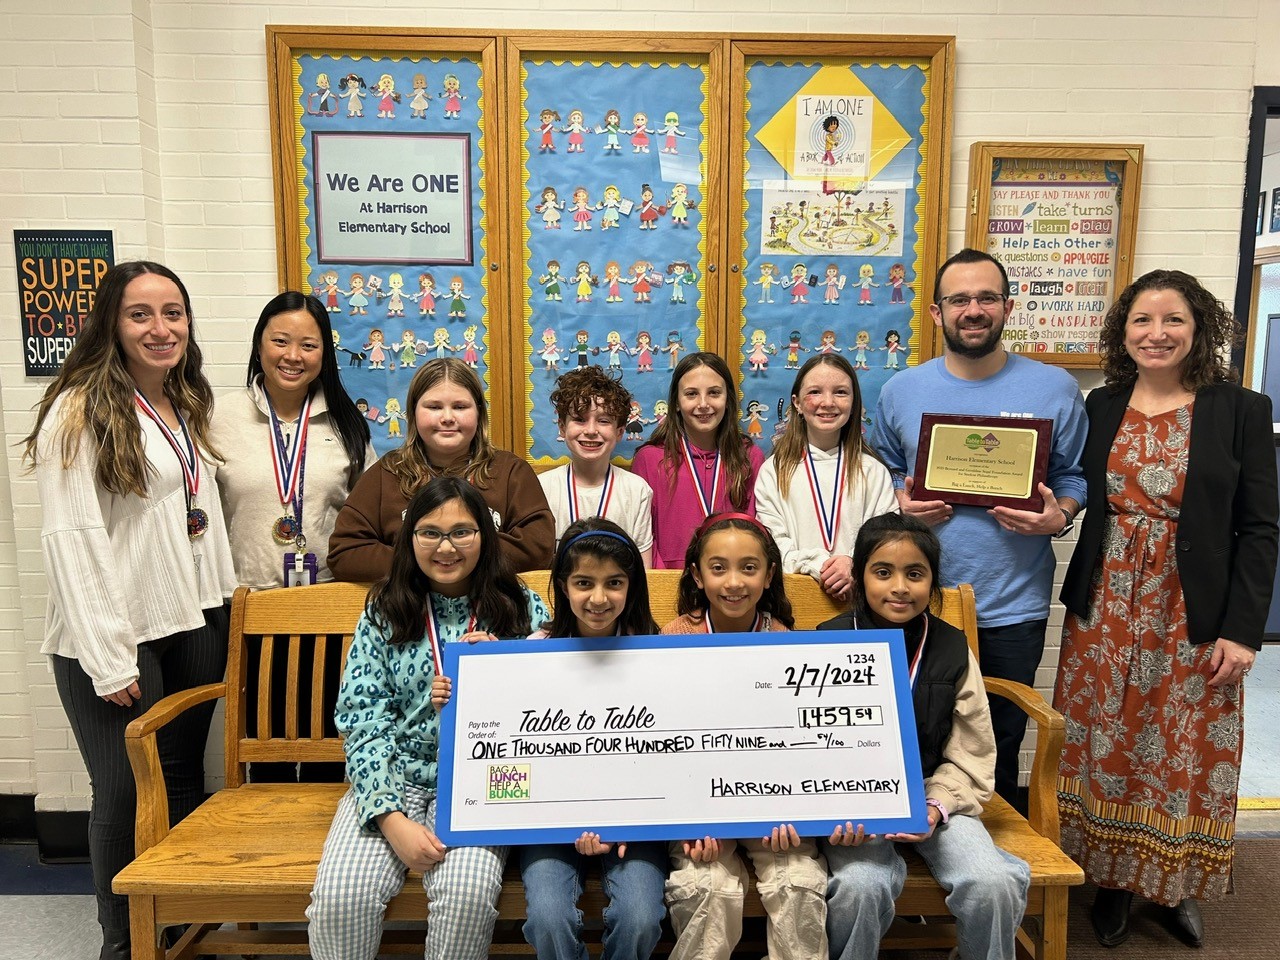 Livingston’s Harrison Elementary School Earns Award After Raising Funds for 14,600 Meals